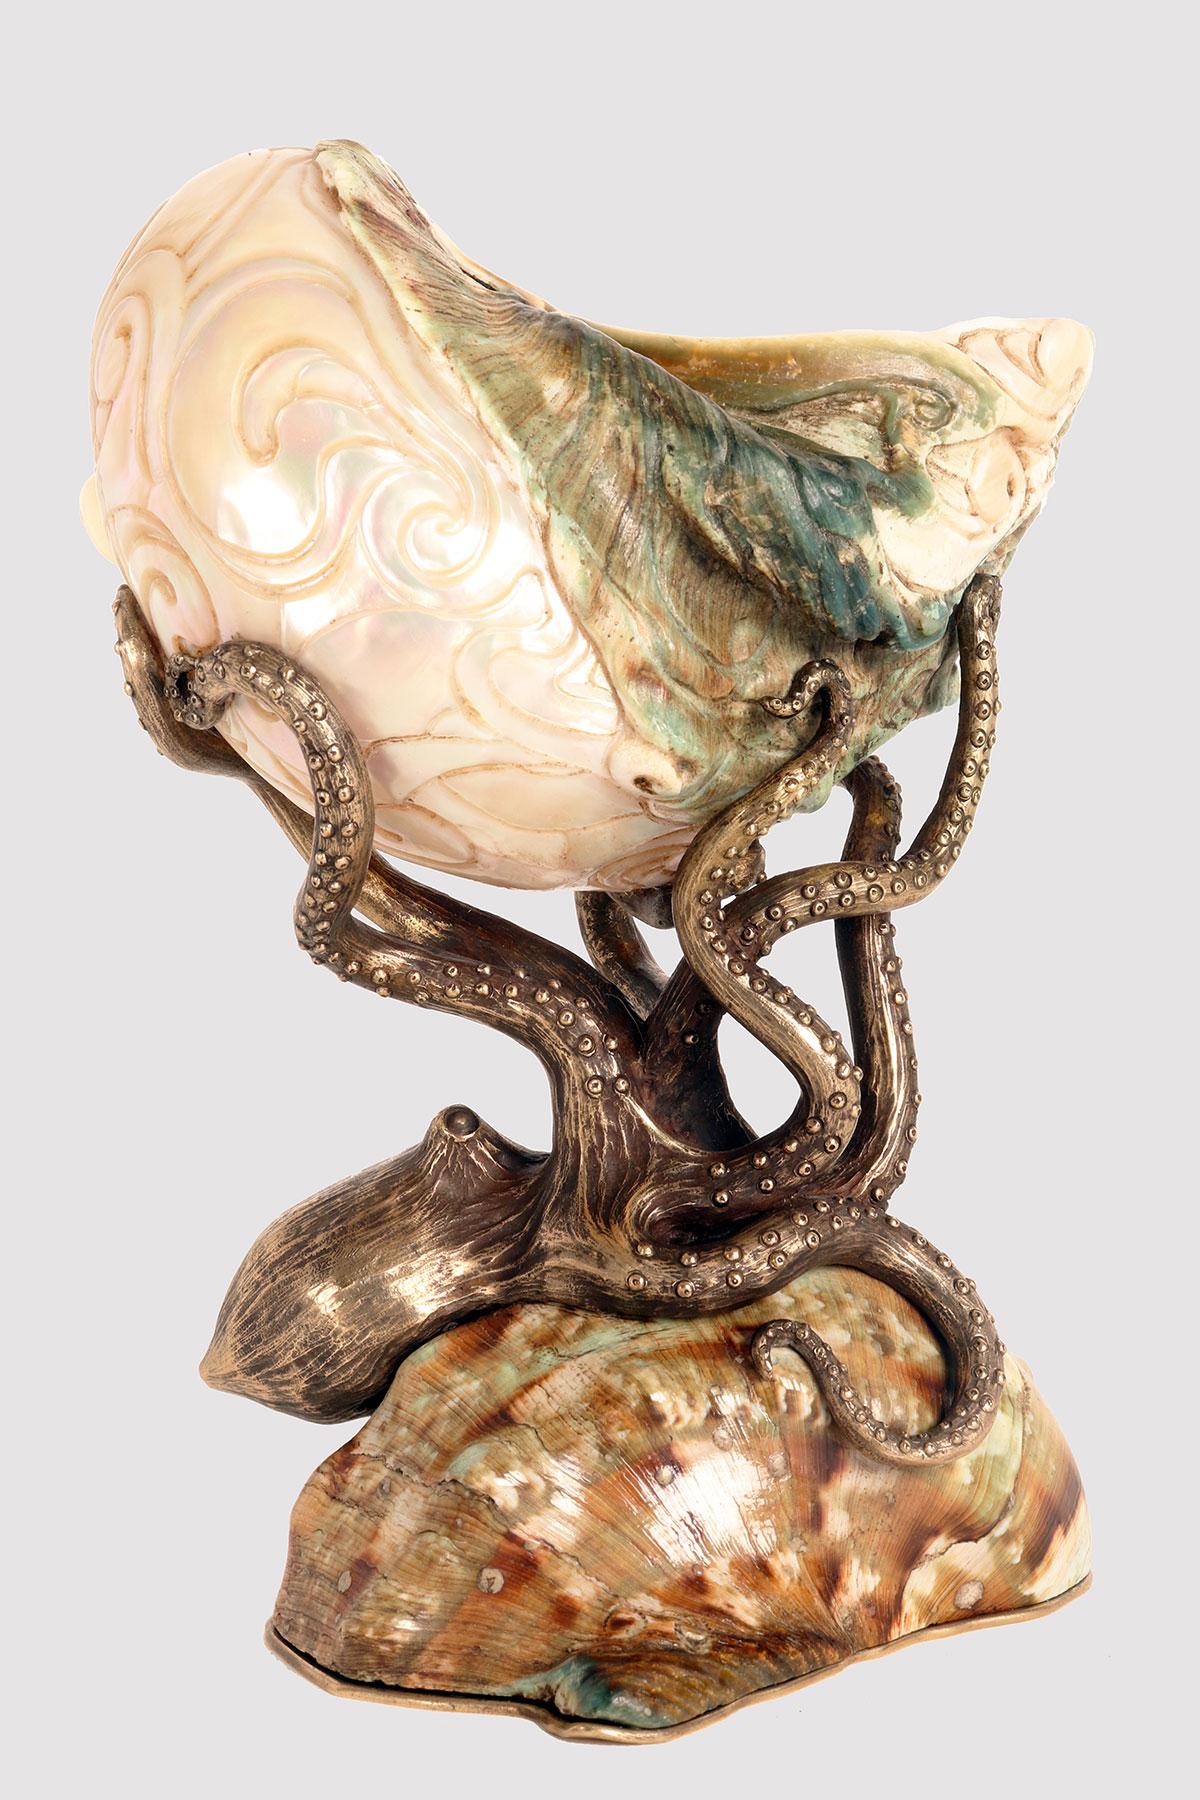 A Specimen Naturale from Wuderkammer: a cup with a shell of Turbo marmoratus, knowns as the green turban, the marbled turban or great green turban. The Specimen is mounted on a gilt bronze structure depicting an octopus and features engravings